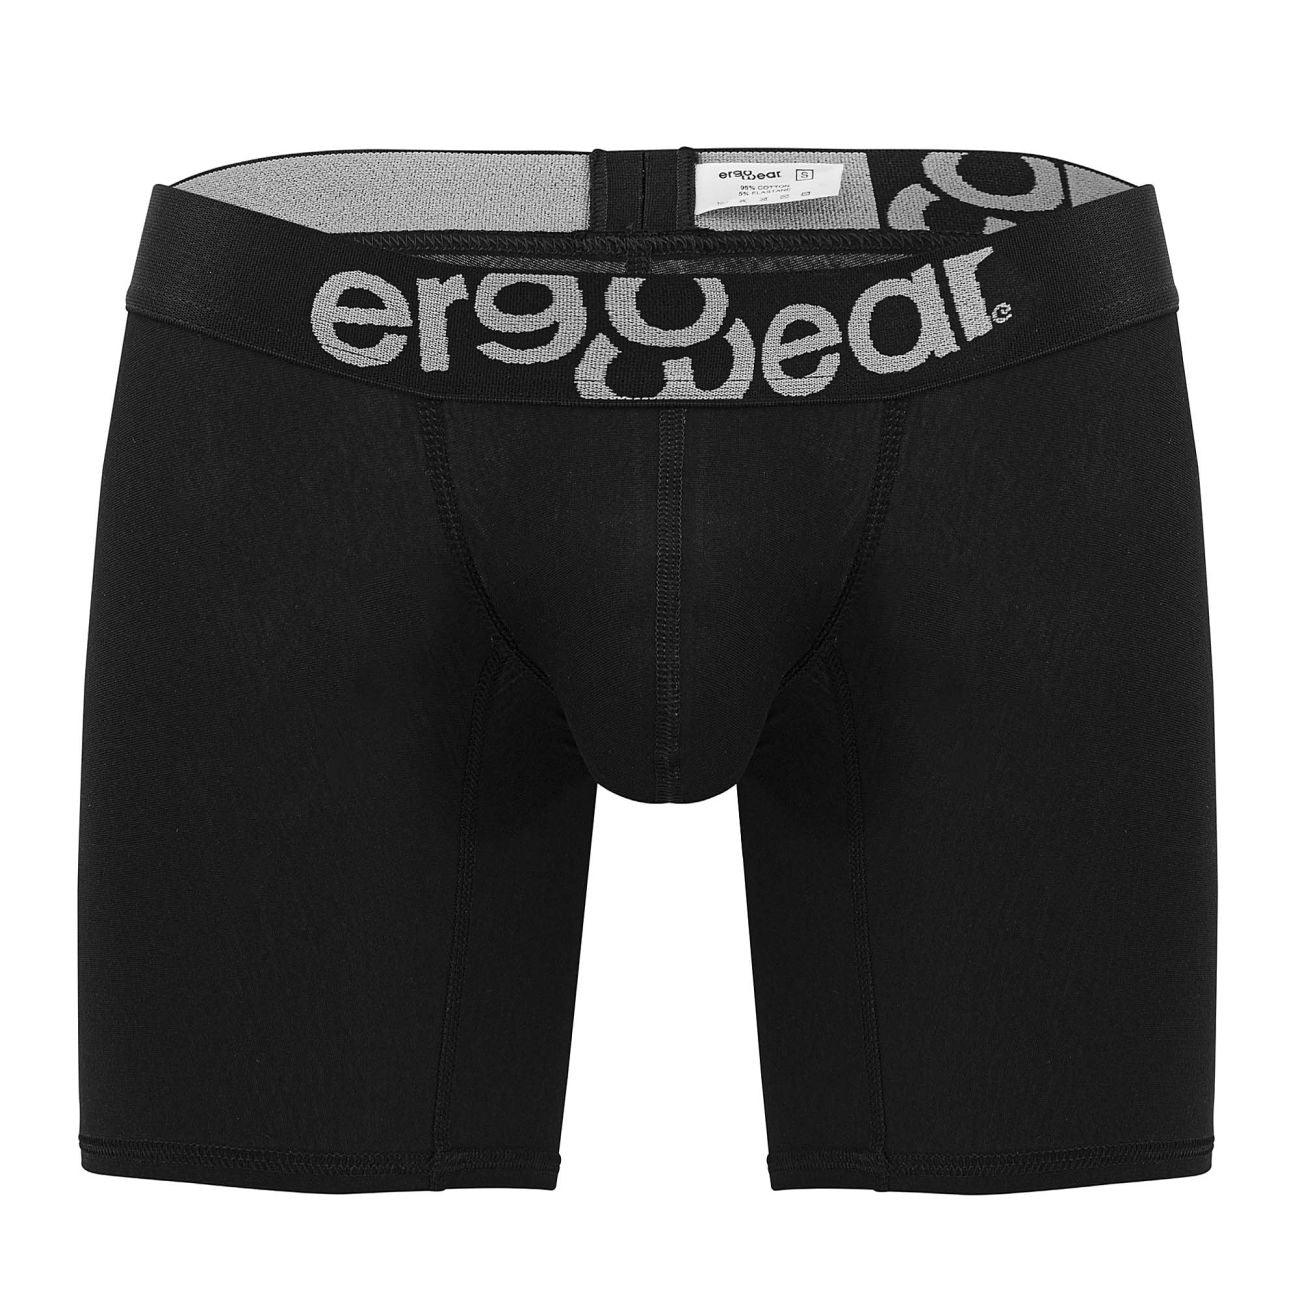 image of product,MAX COTTON Boxer Briefs - SEXYEONE